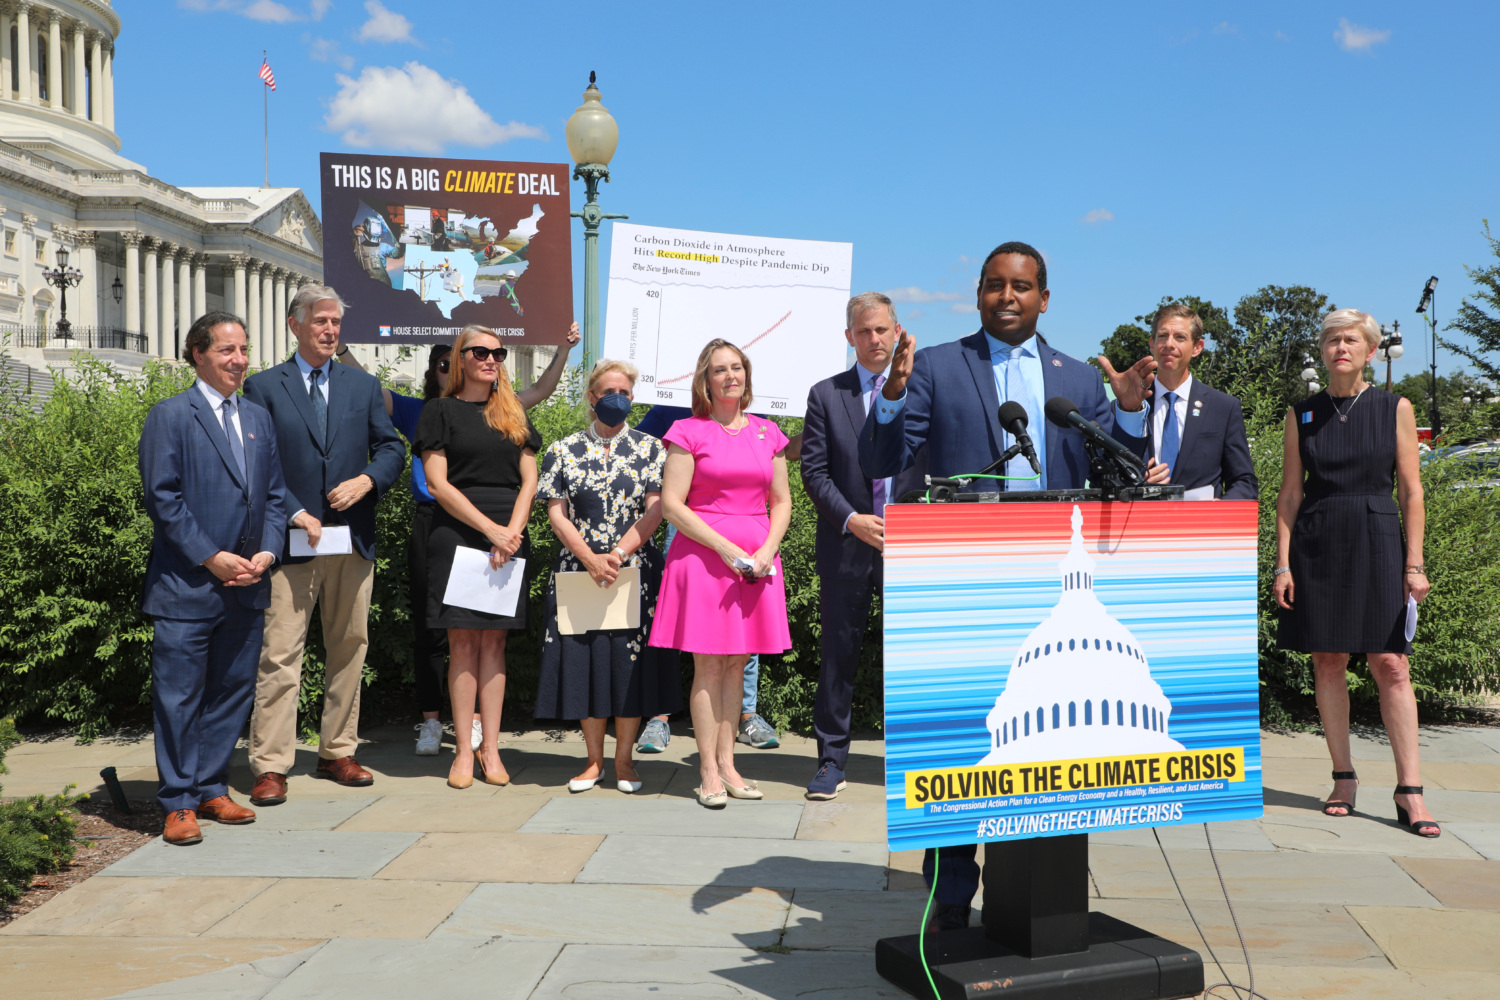 Representative Joe Neguse speaks at a Climate Crisis Press Event in front of fellow lawmakers